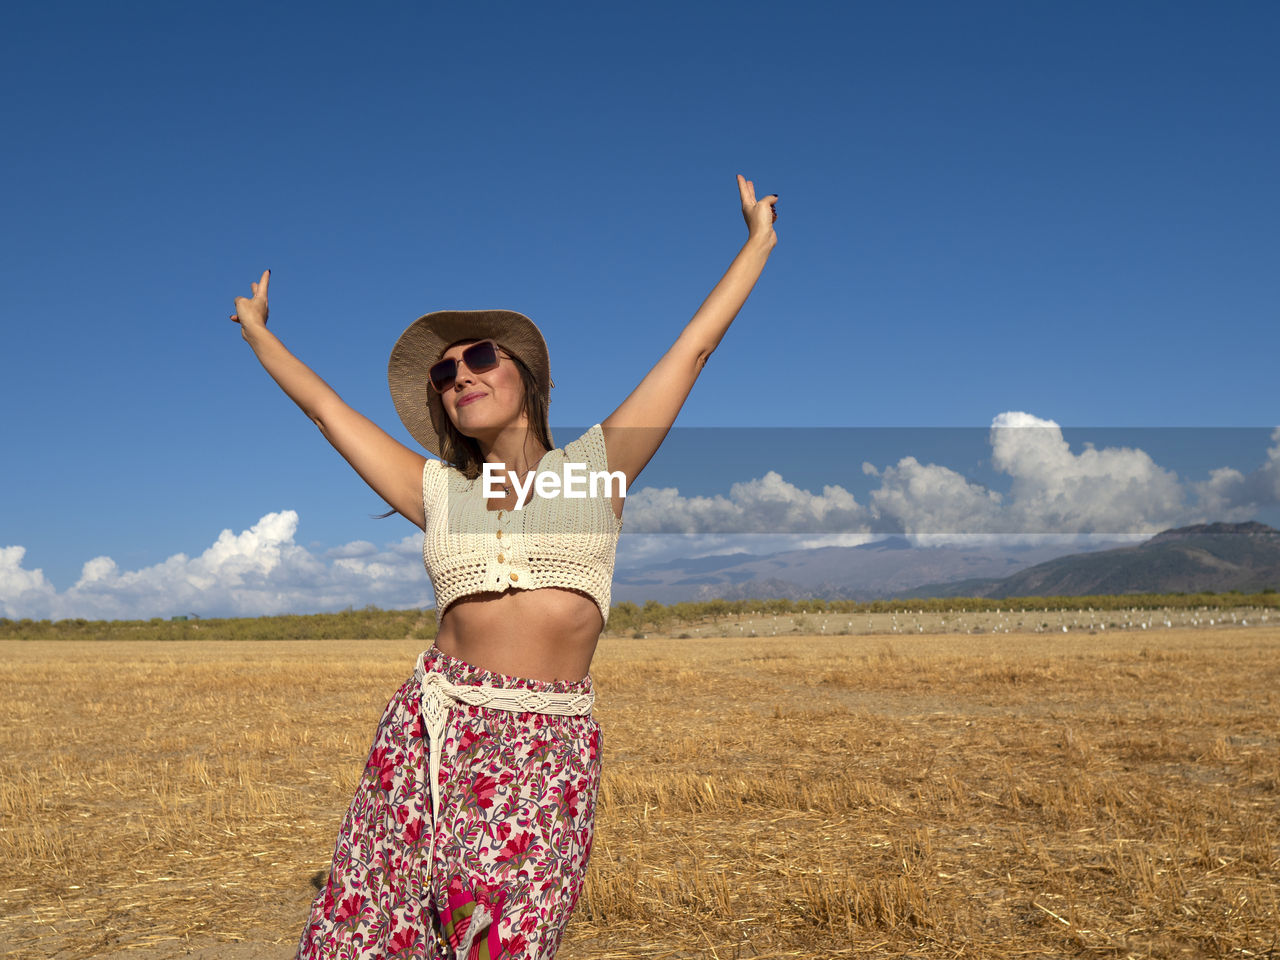 sky, one person, adult, women, arm, landscape, fashion, nature, happiness, land, limb, arms raised, smiling, emotion, human limb, environment, blue, clothing, cheerful, summer, rural scene, young adult, sunlight, positive emotion, glasses, standing, field, portrait, beauty in nature, sunglasses, day, joy, sunny, enjoyment, cloud, travel, copy space, female, fun, outdoors, arms outstretched, vacation, scenics - nature, trip, leisure activity, carefree, front view, holiday, person, excitement, looking at camera, vitality, lifestyles, hand, hand raised, agriculture, photo shoot, travel destinations, plant, success, horizon, dress